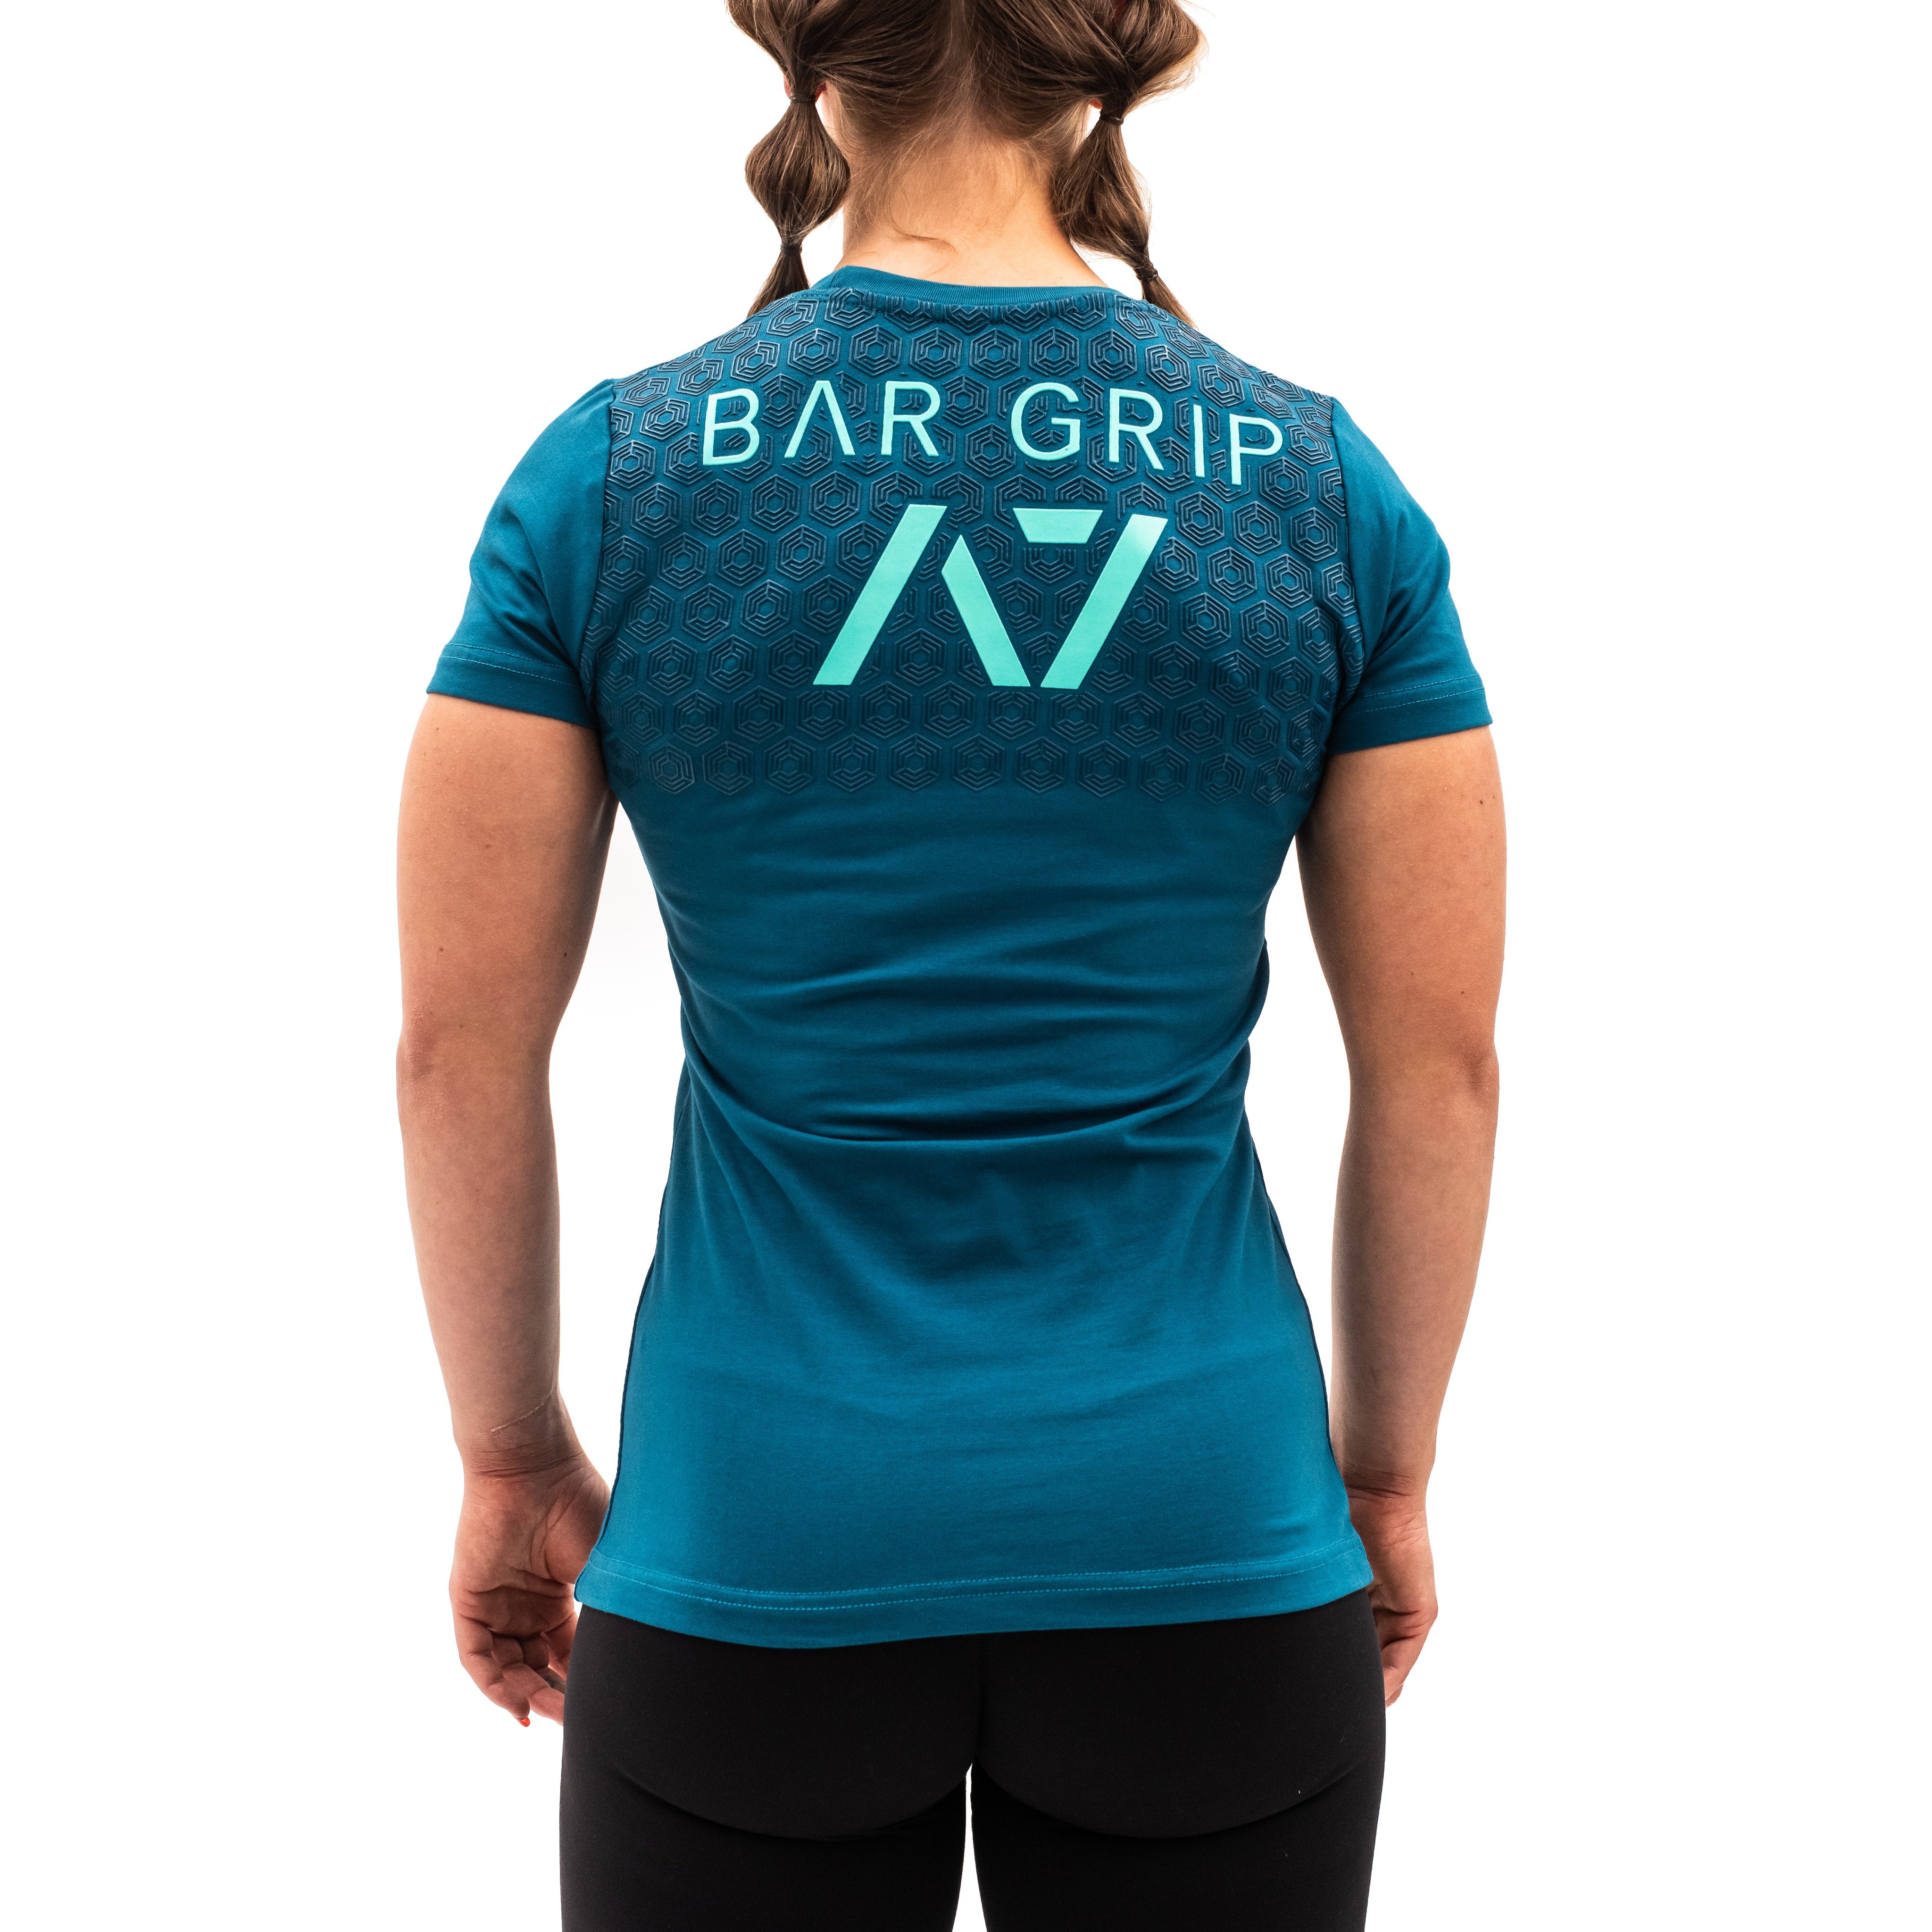 Sphere Bar Grip T-shirt, great as a squat shirt. Purchase Sphere Bar Grip tshirt UK from A7 UK or A7 Europe. No more chalk and no more sliding. Best Bar Grip Tshirts, shipping to UK and Europe from A7 UK or A7 Europe. The best Powerlifting apparel for all your workouts. Available in UK and Europe including France, Italy, Germany, Sweden and Poland